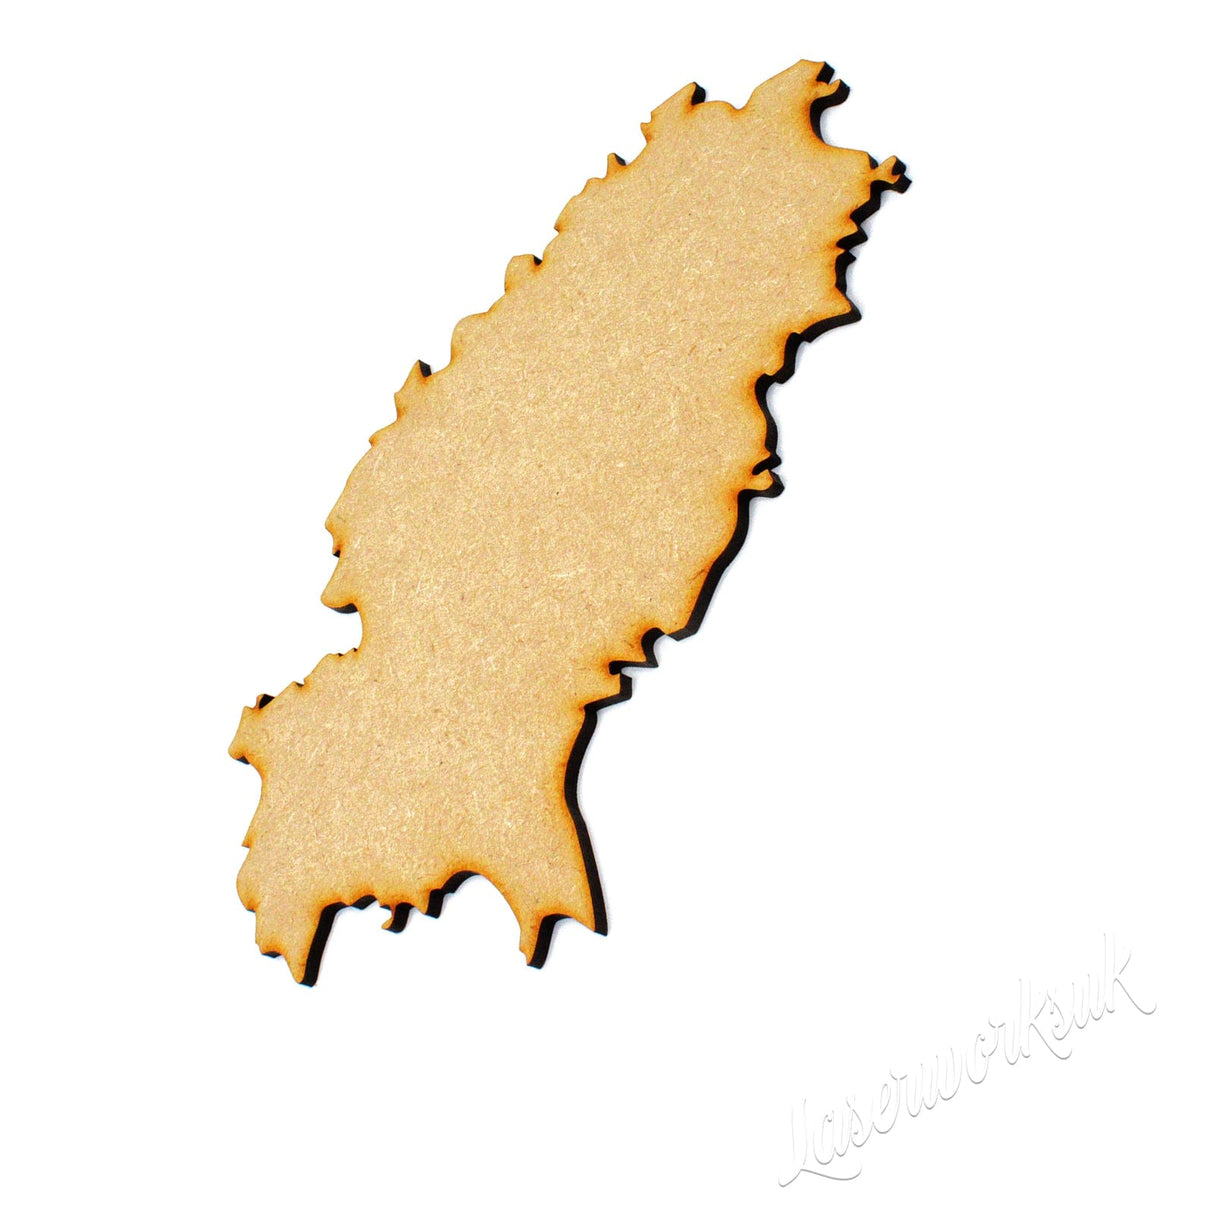 LaserworksUK Wooden Map for Crafts Wooden Ibiza Maps -  Spanish Island Outline Shapes